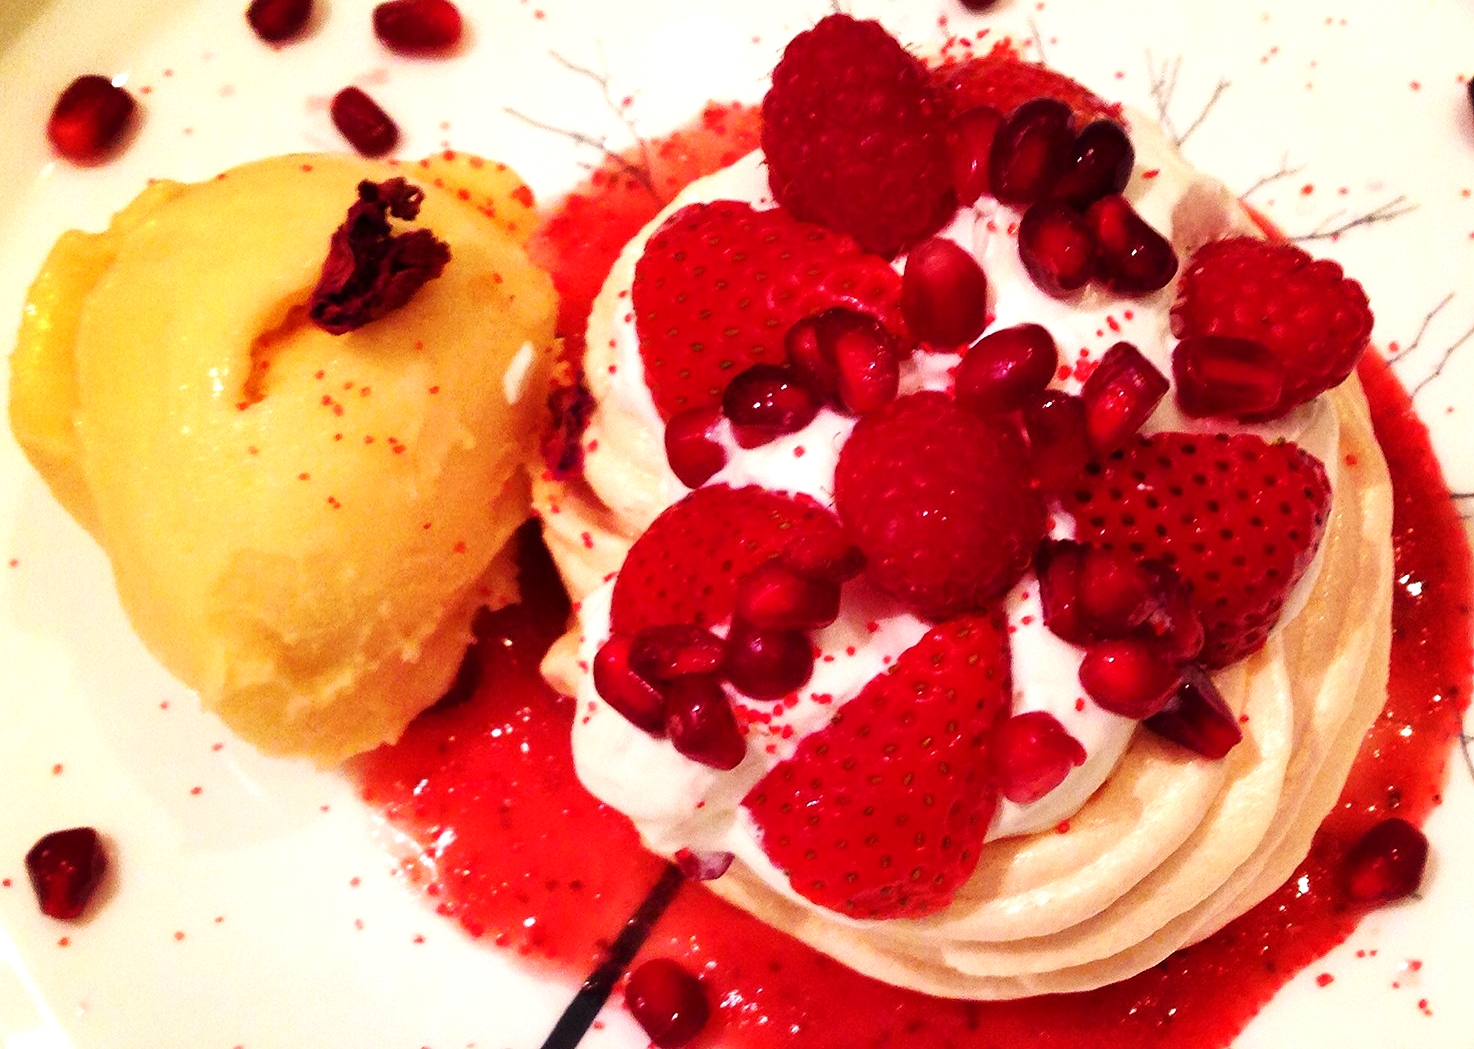 Mini Pavlova with creme chantilly, red fruits, strawberry sauce, and passion fruit sorbet